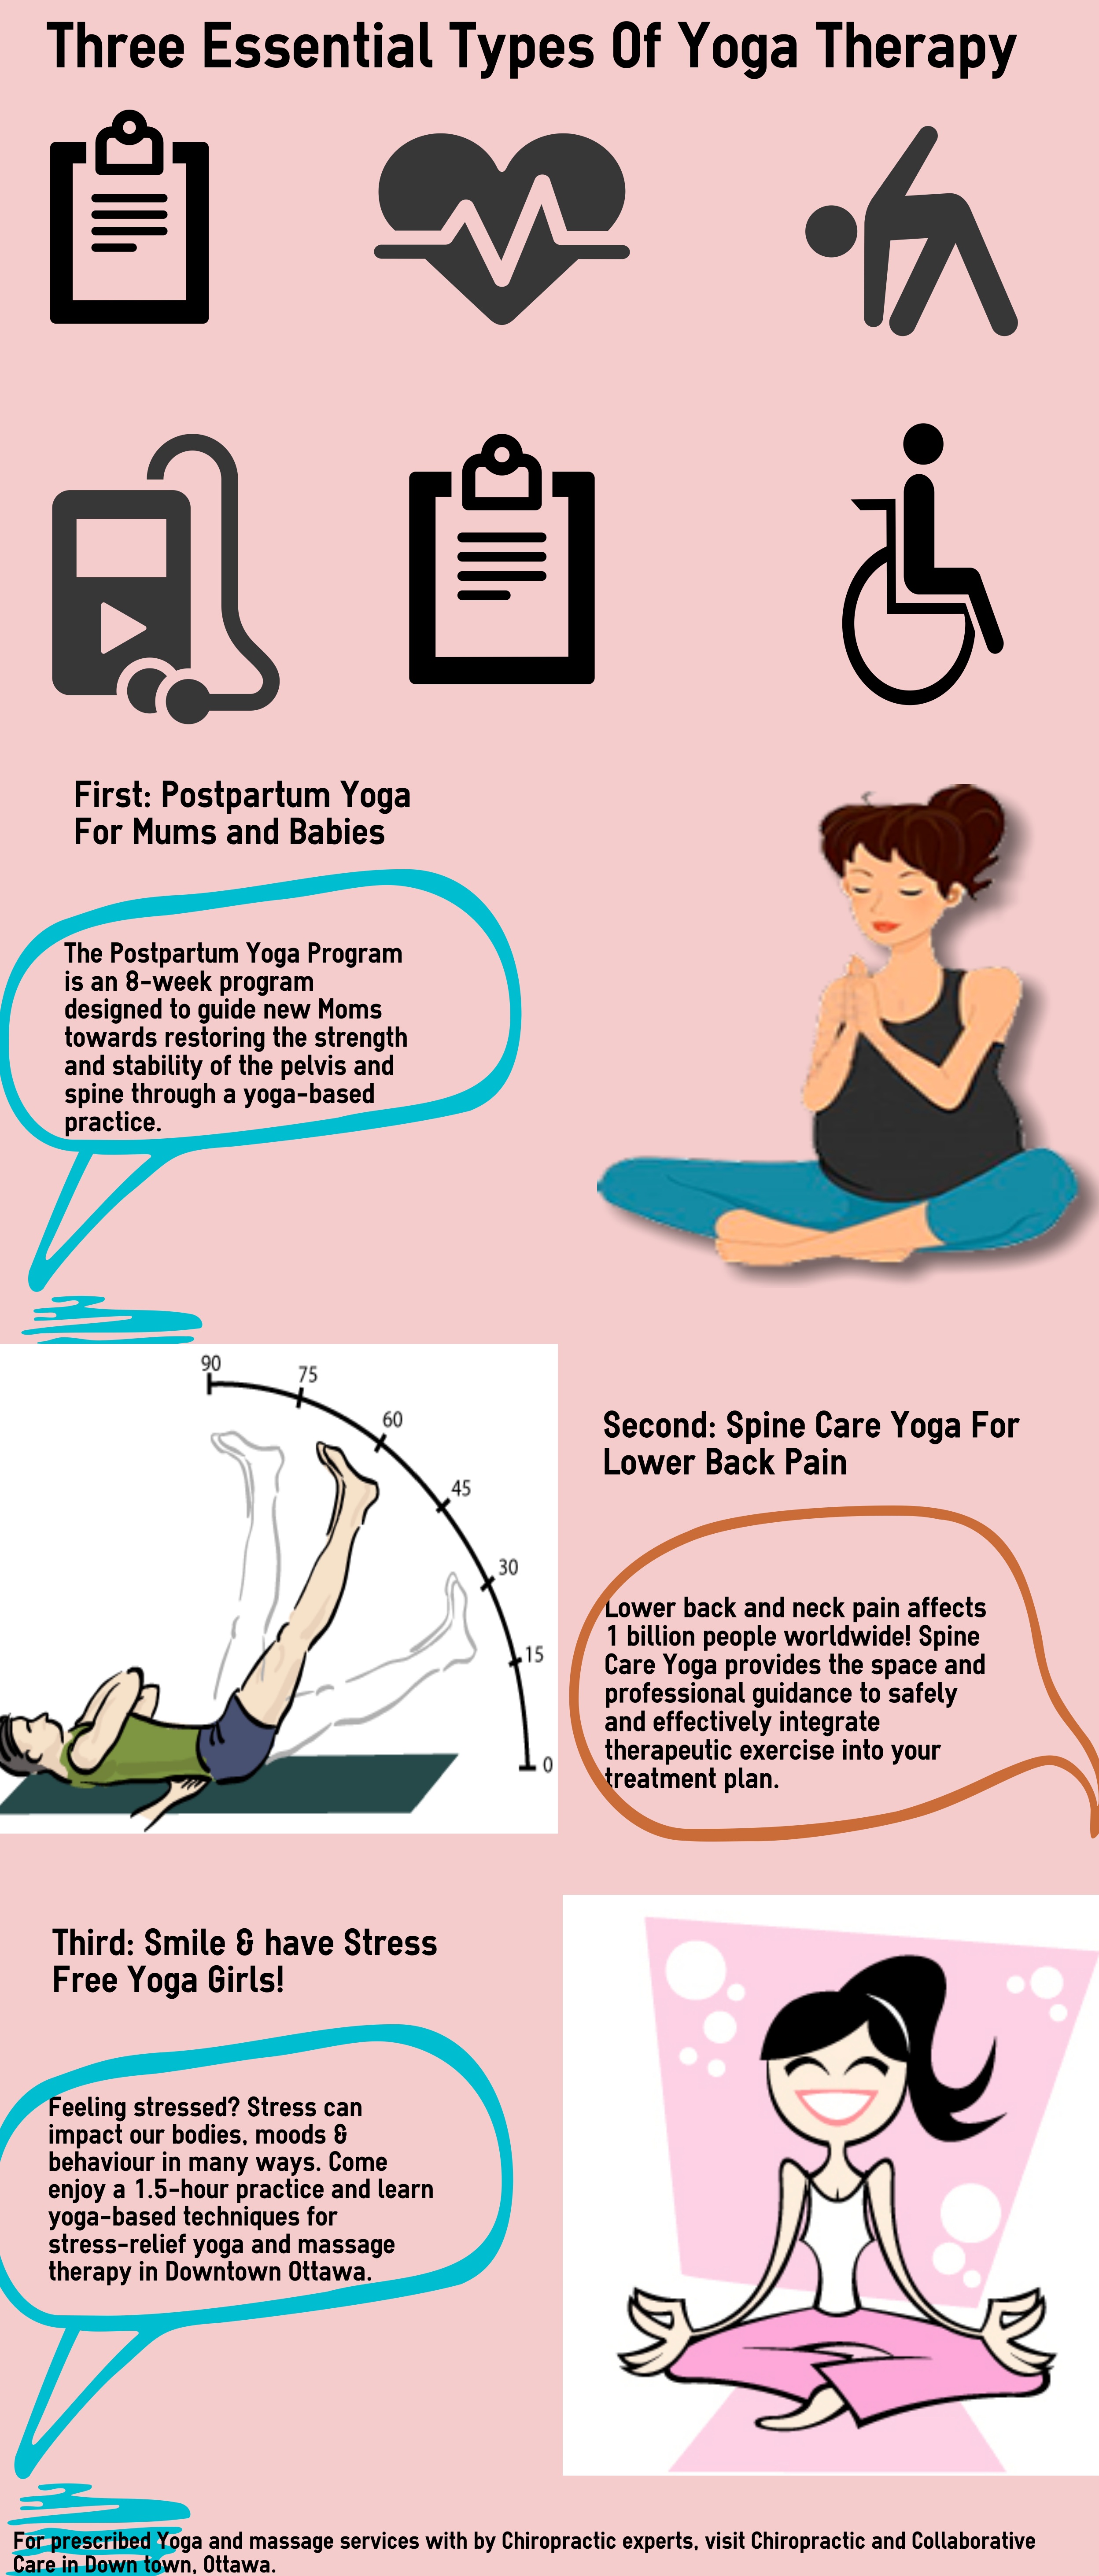 4 Types Of Basic Yoga Postures For Beginners by Janet Suzanna - Issuu